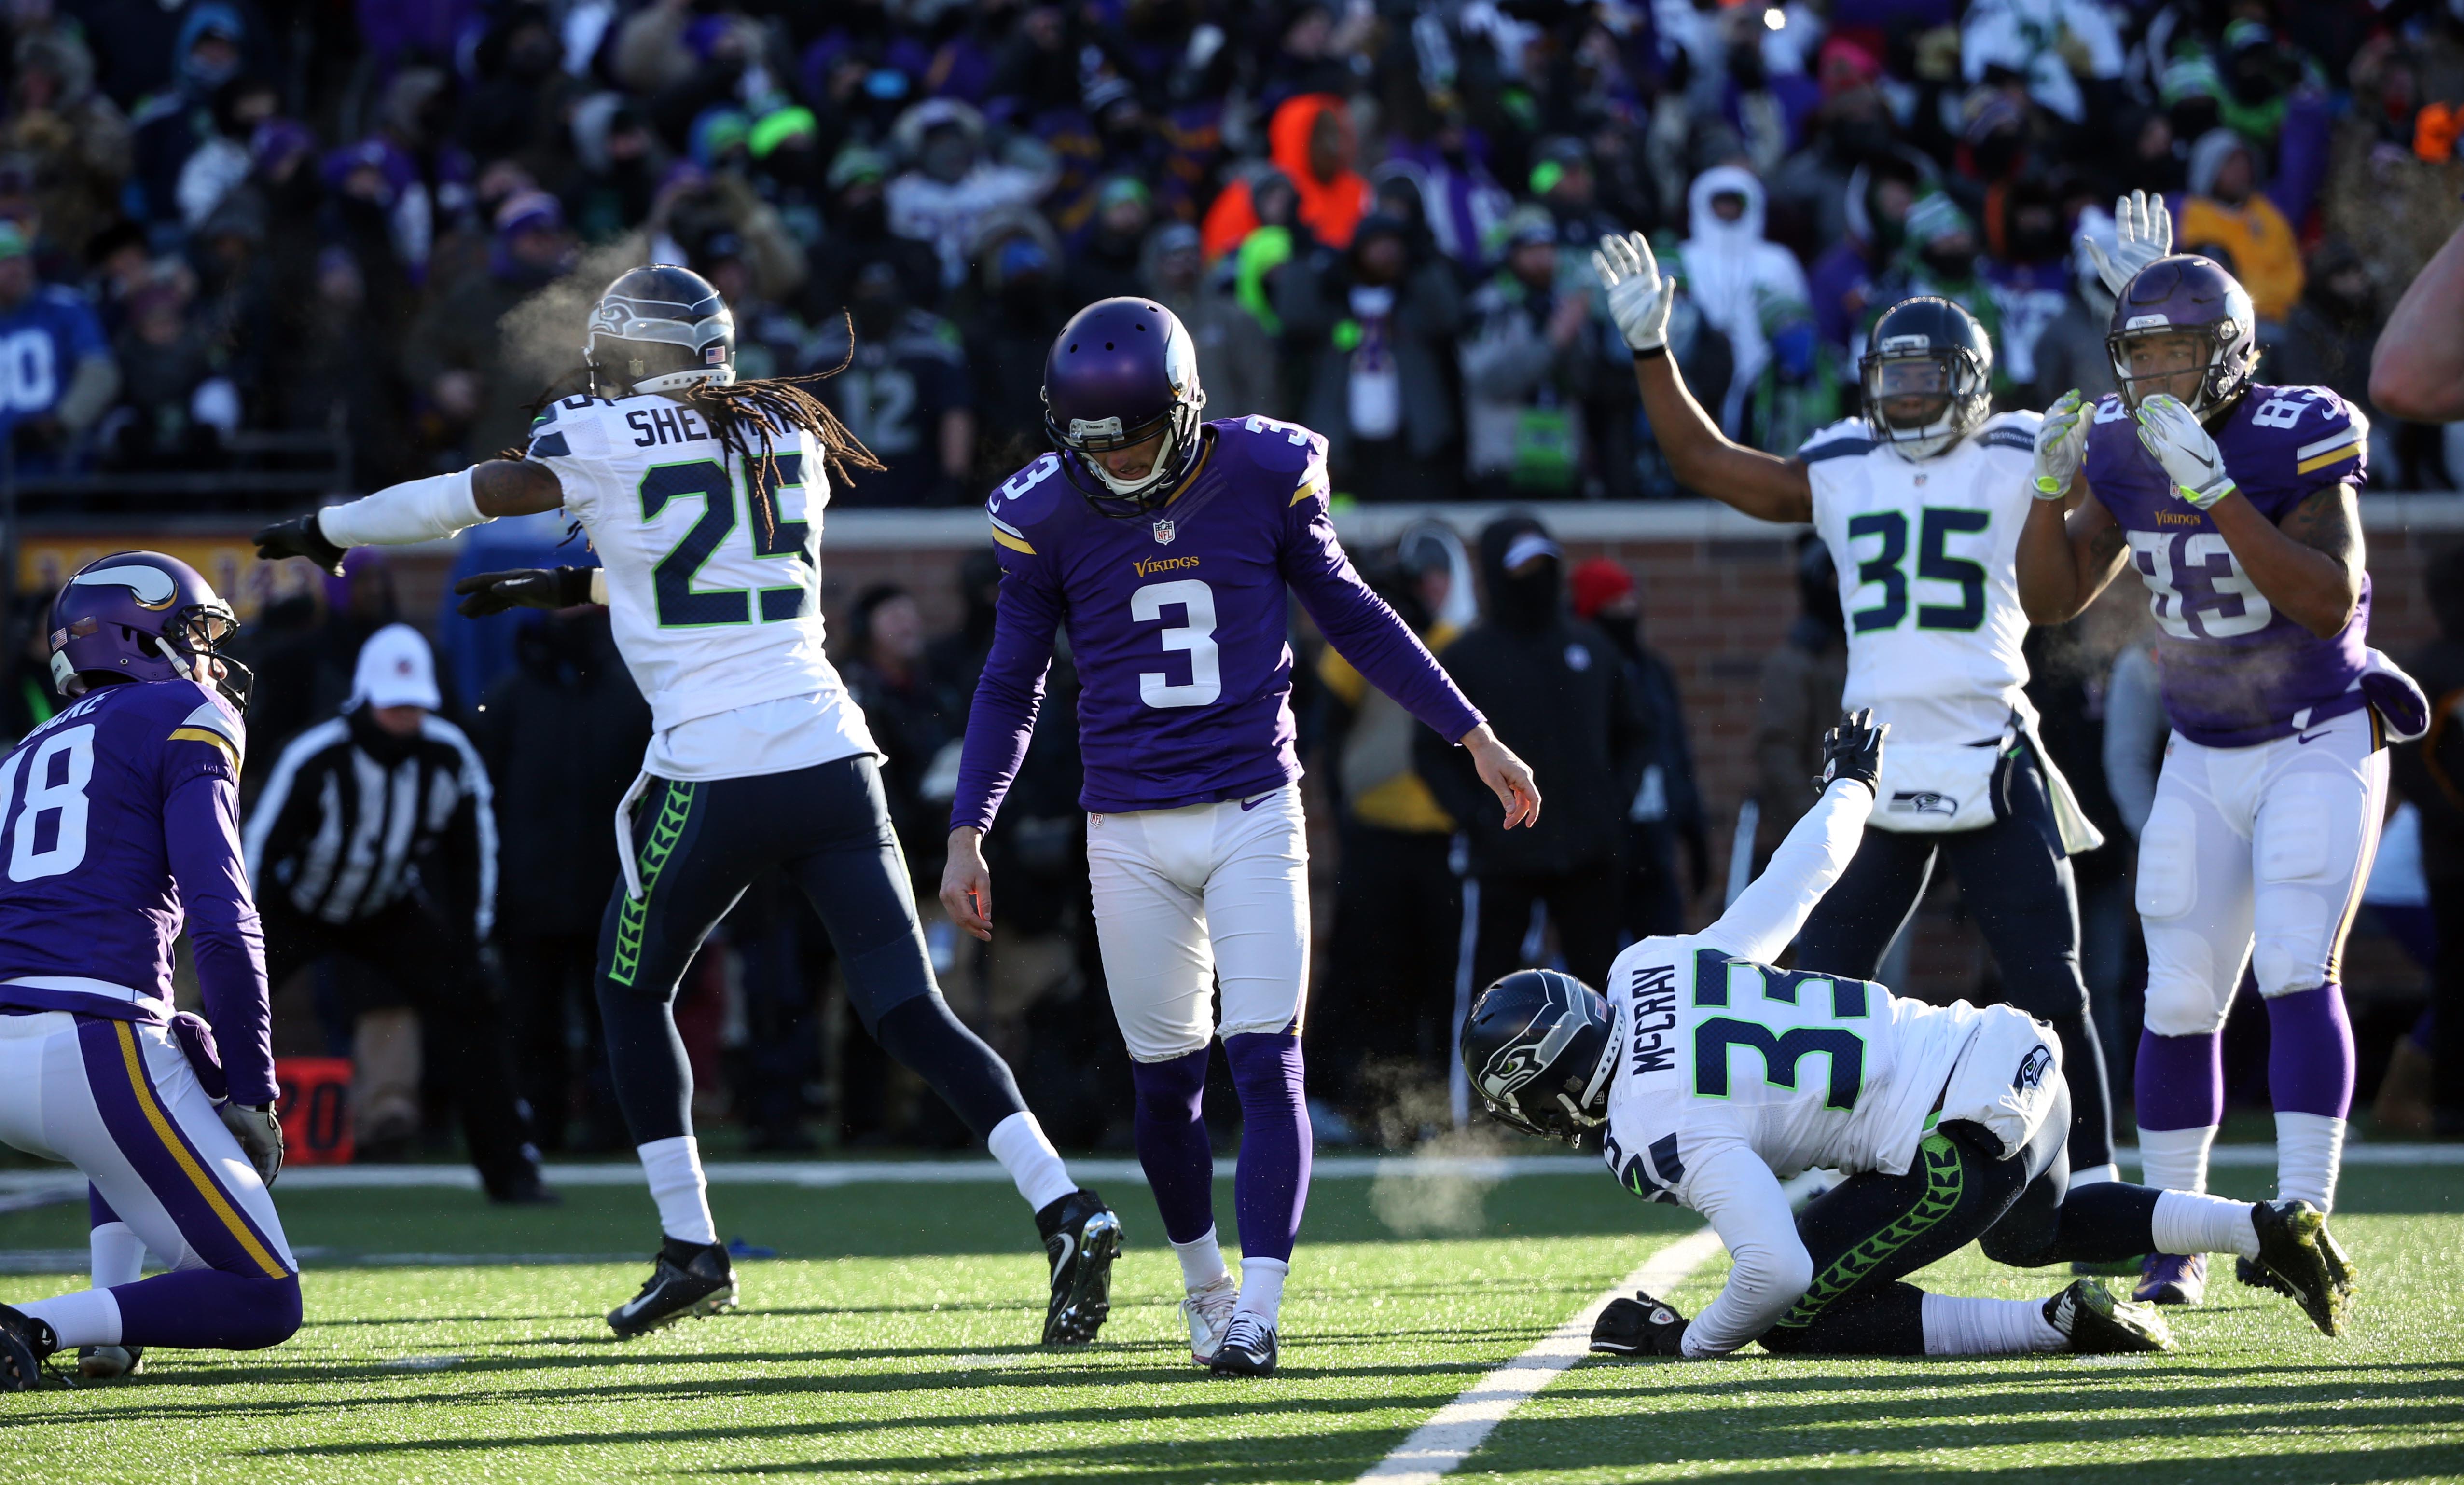 Ten fun facts about the Seahawks win over the Vikings